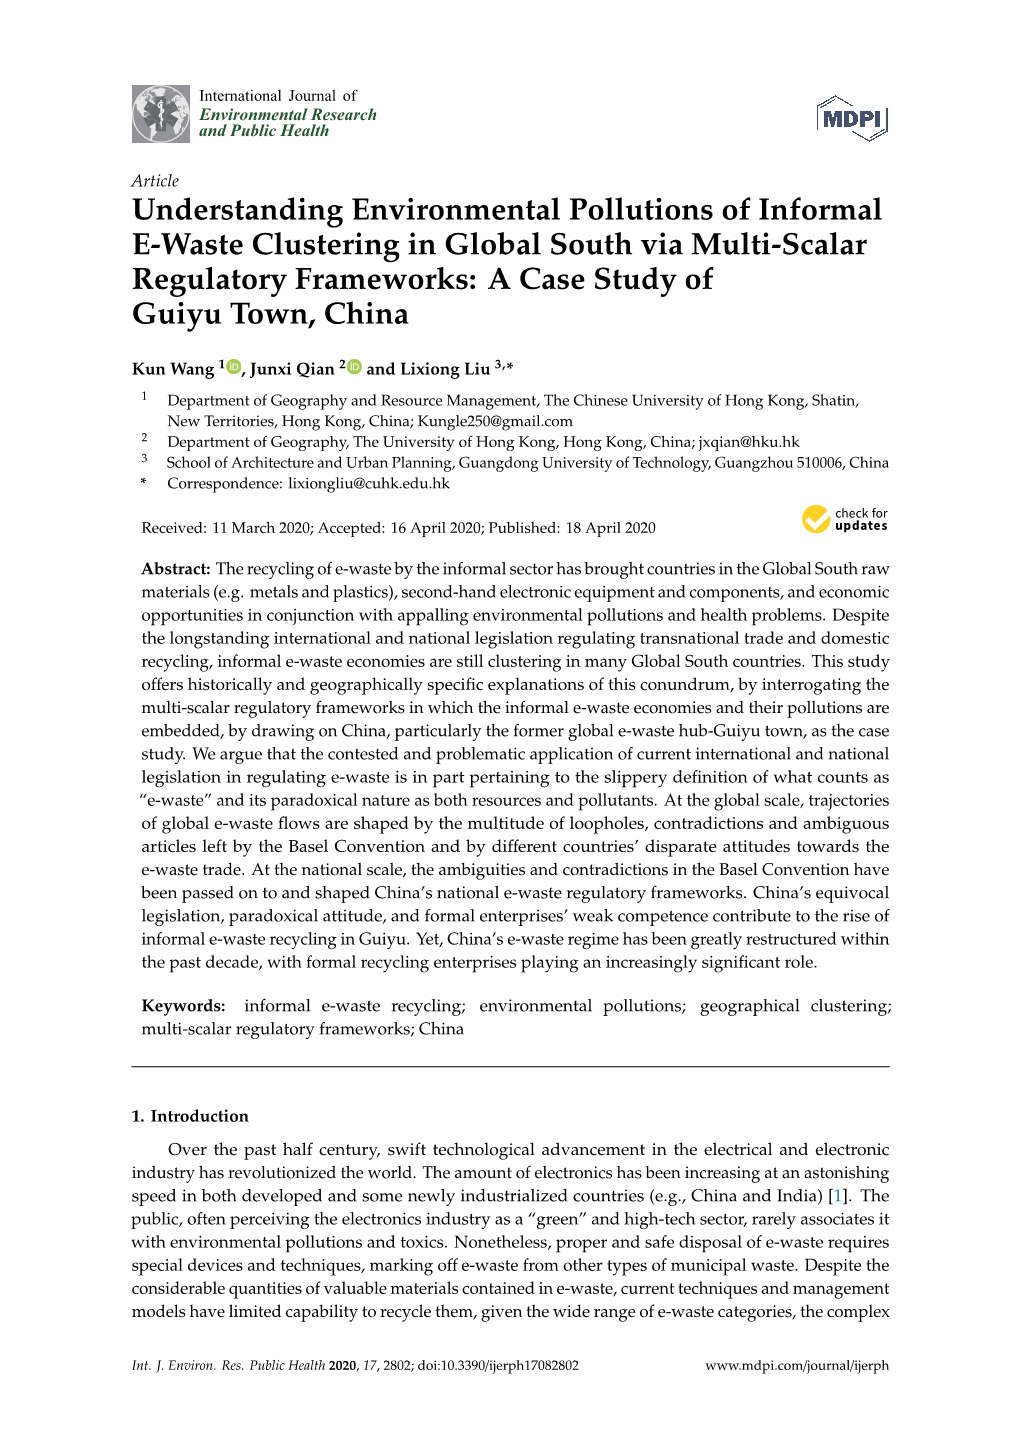 Understanding Environmental Pollutions of Informal E-Waste Clustering in Global South Via Multi-Scalar Regulatory Frameworks: a Case Study of Guiyu Town, China